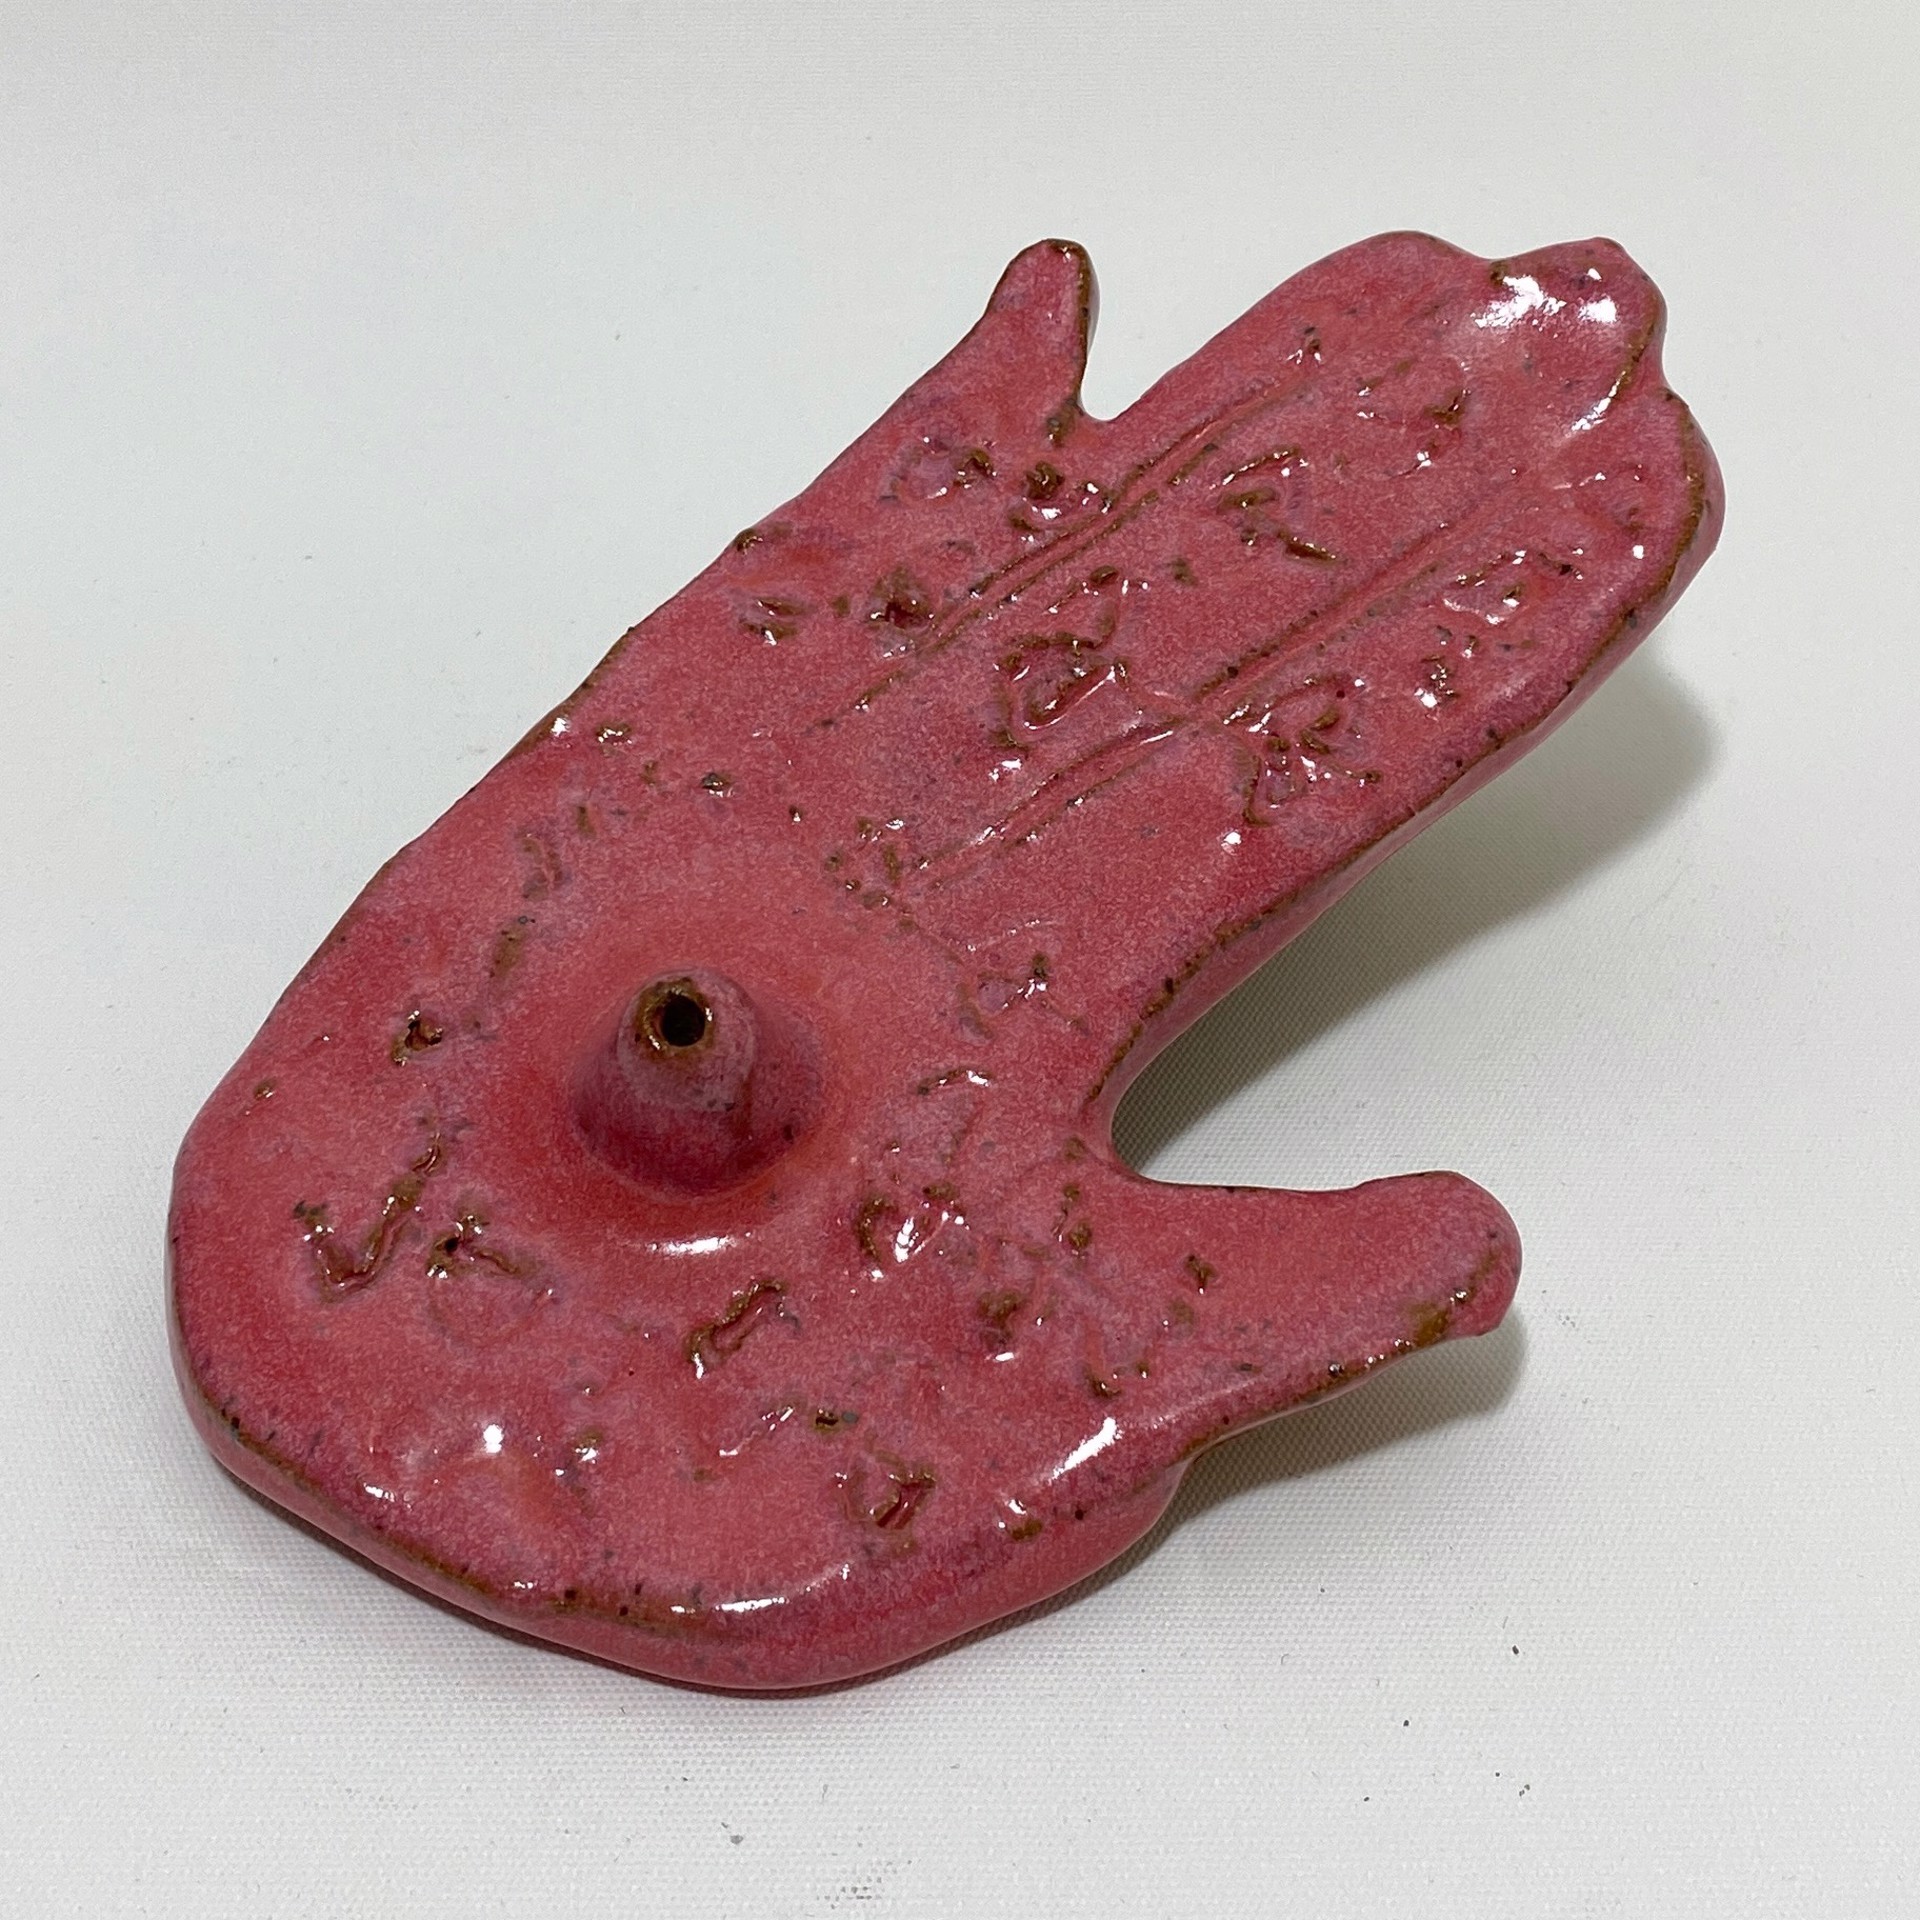 "Pink Hand Incense Holder" by Stephanie by One Step Beyond